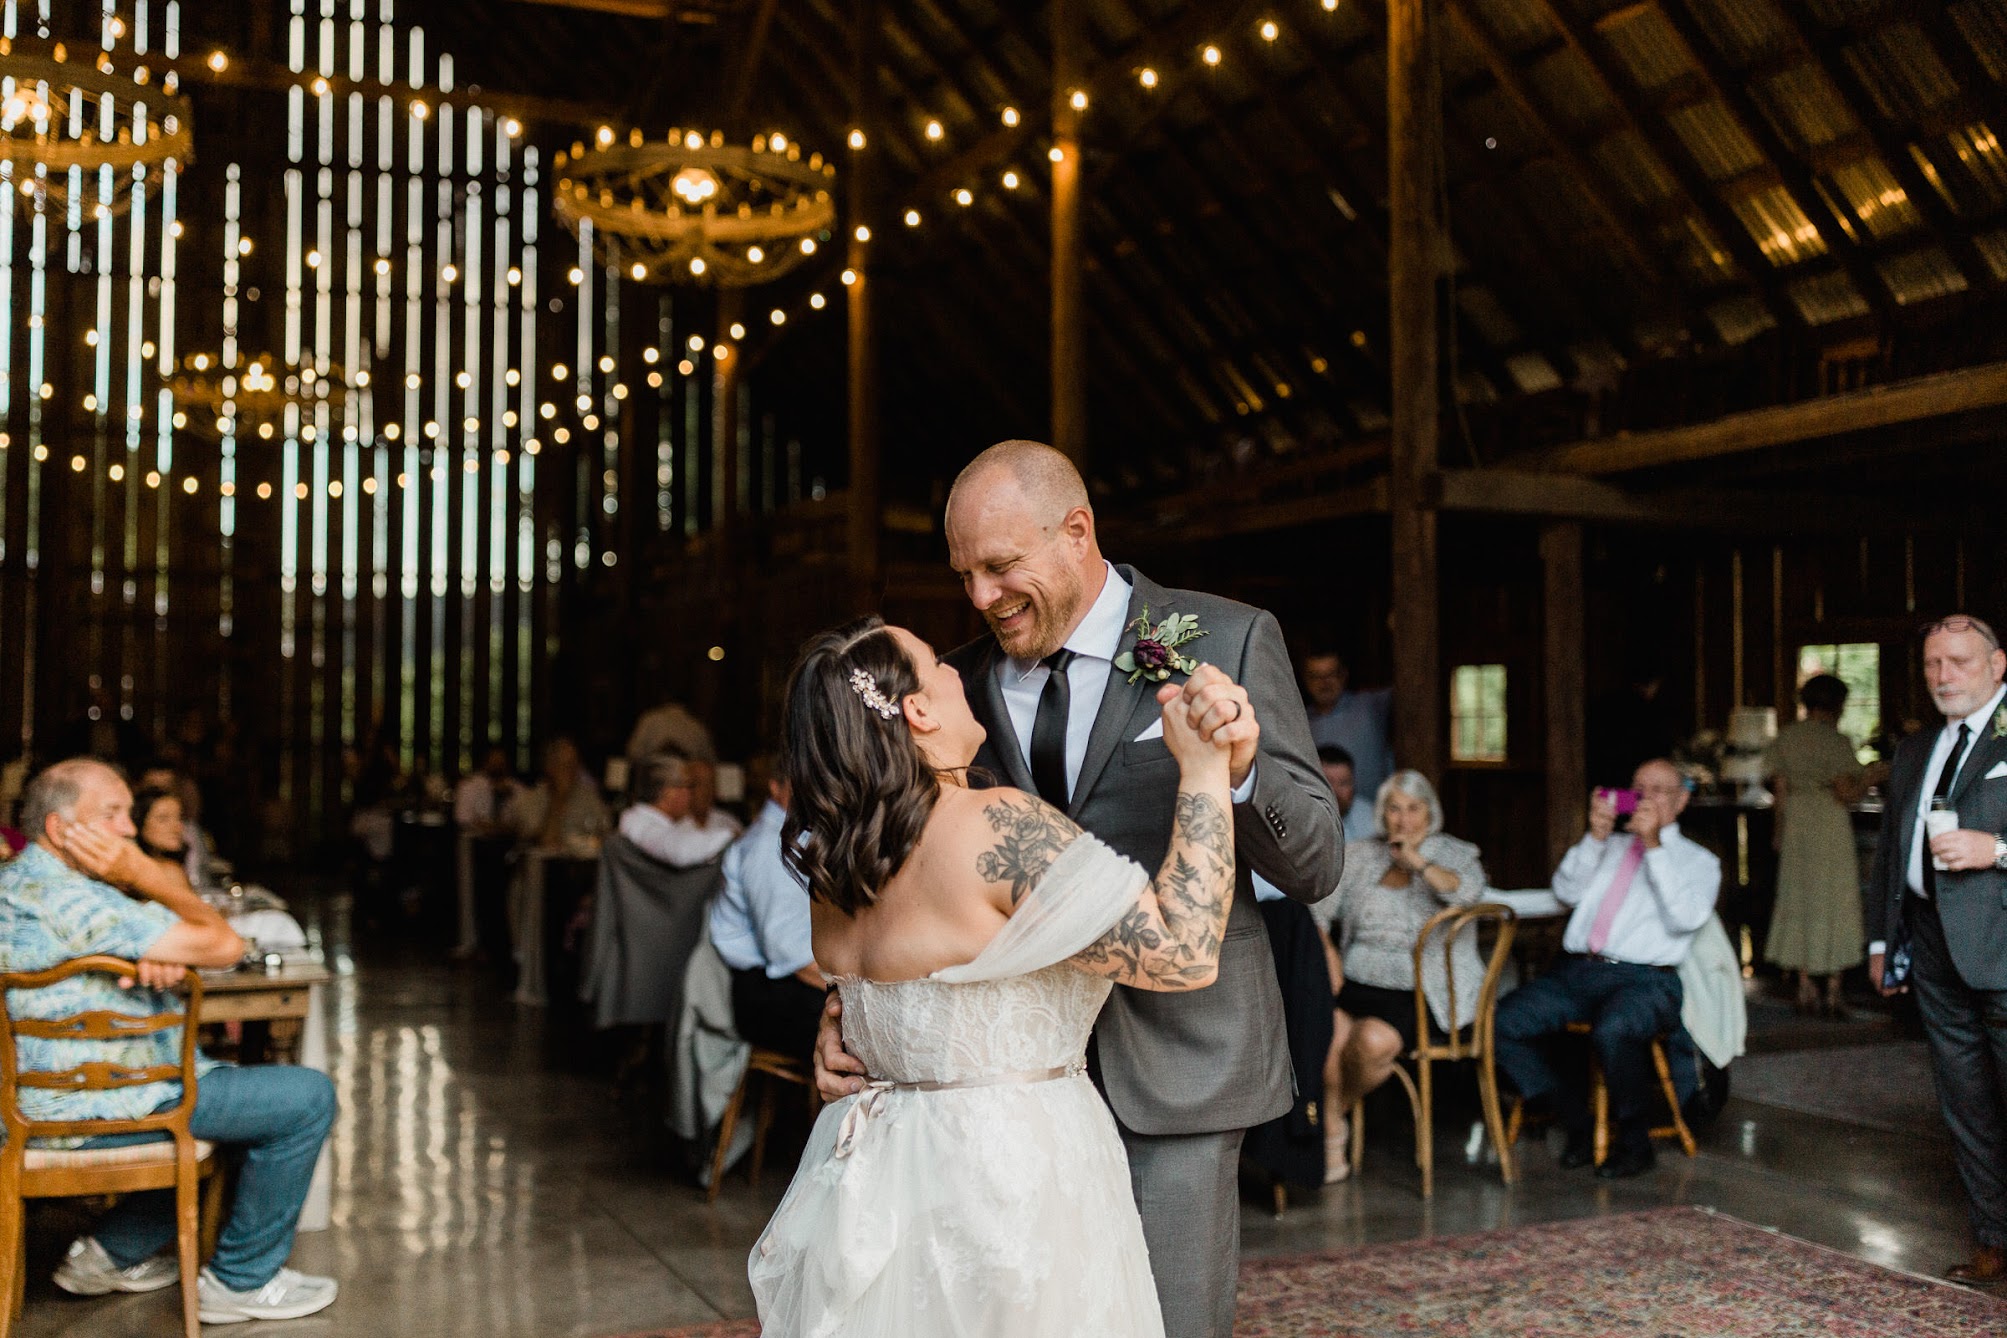 a large rug is being used as the dance floor in this rustic barn